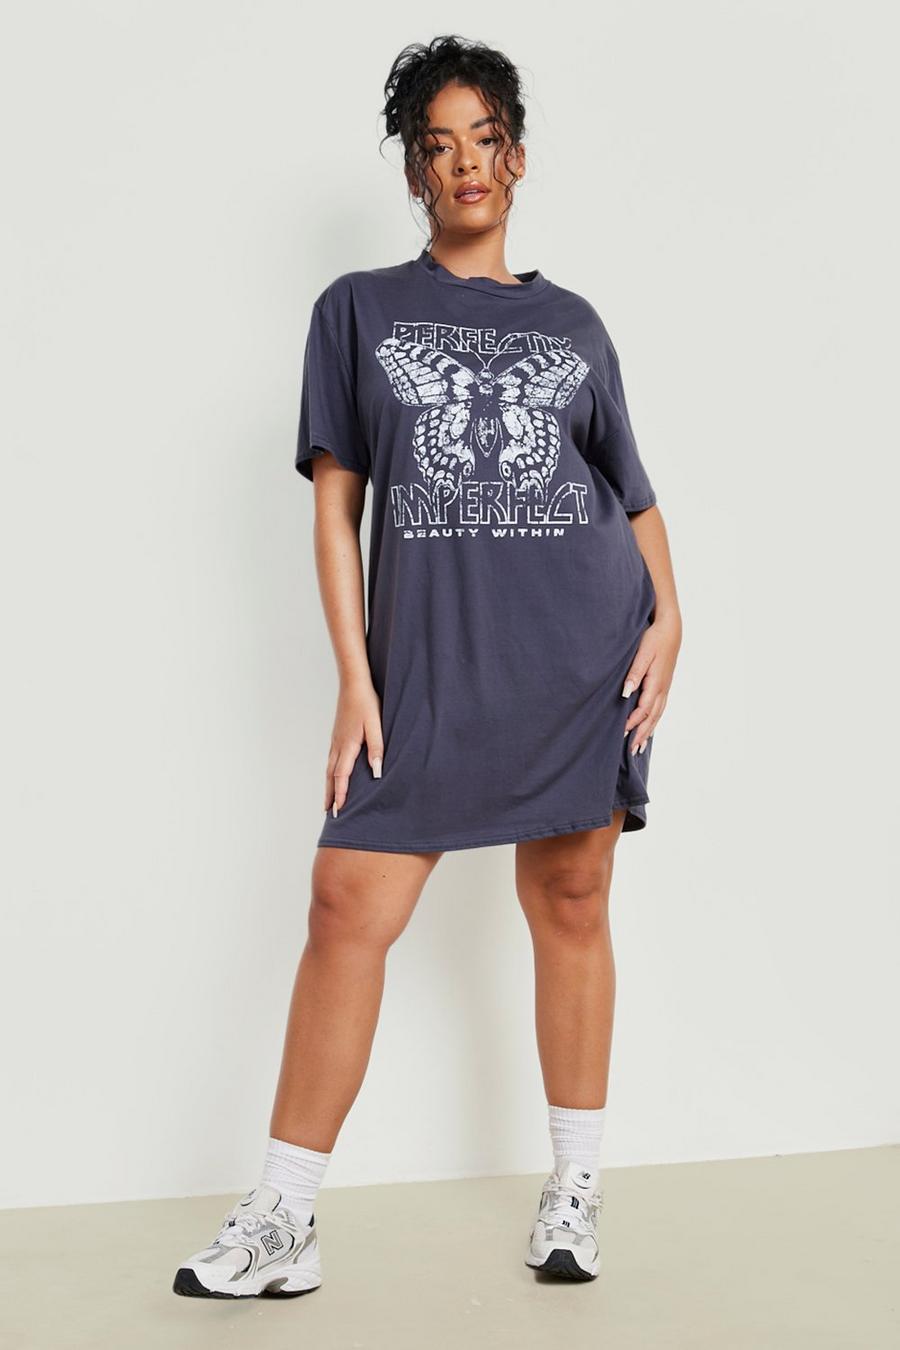 Grande taille - Robe t-shirt à slogan Perfectly Imperfect, Charcoal grau